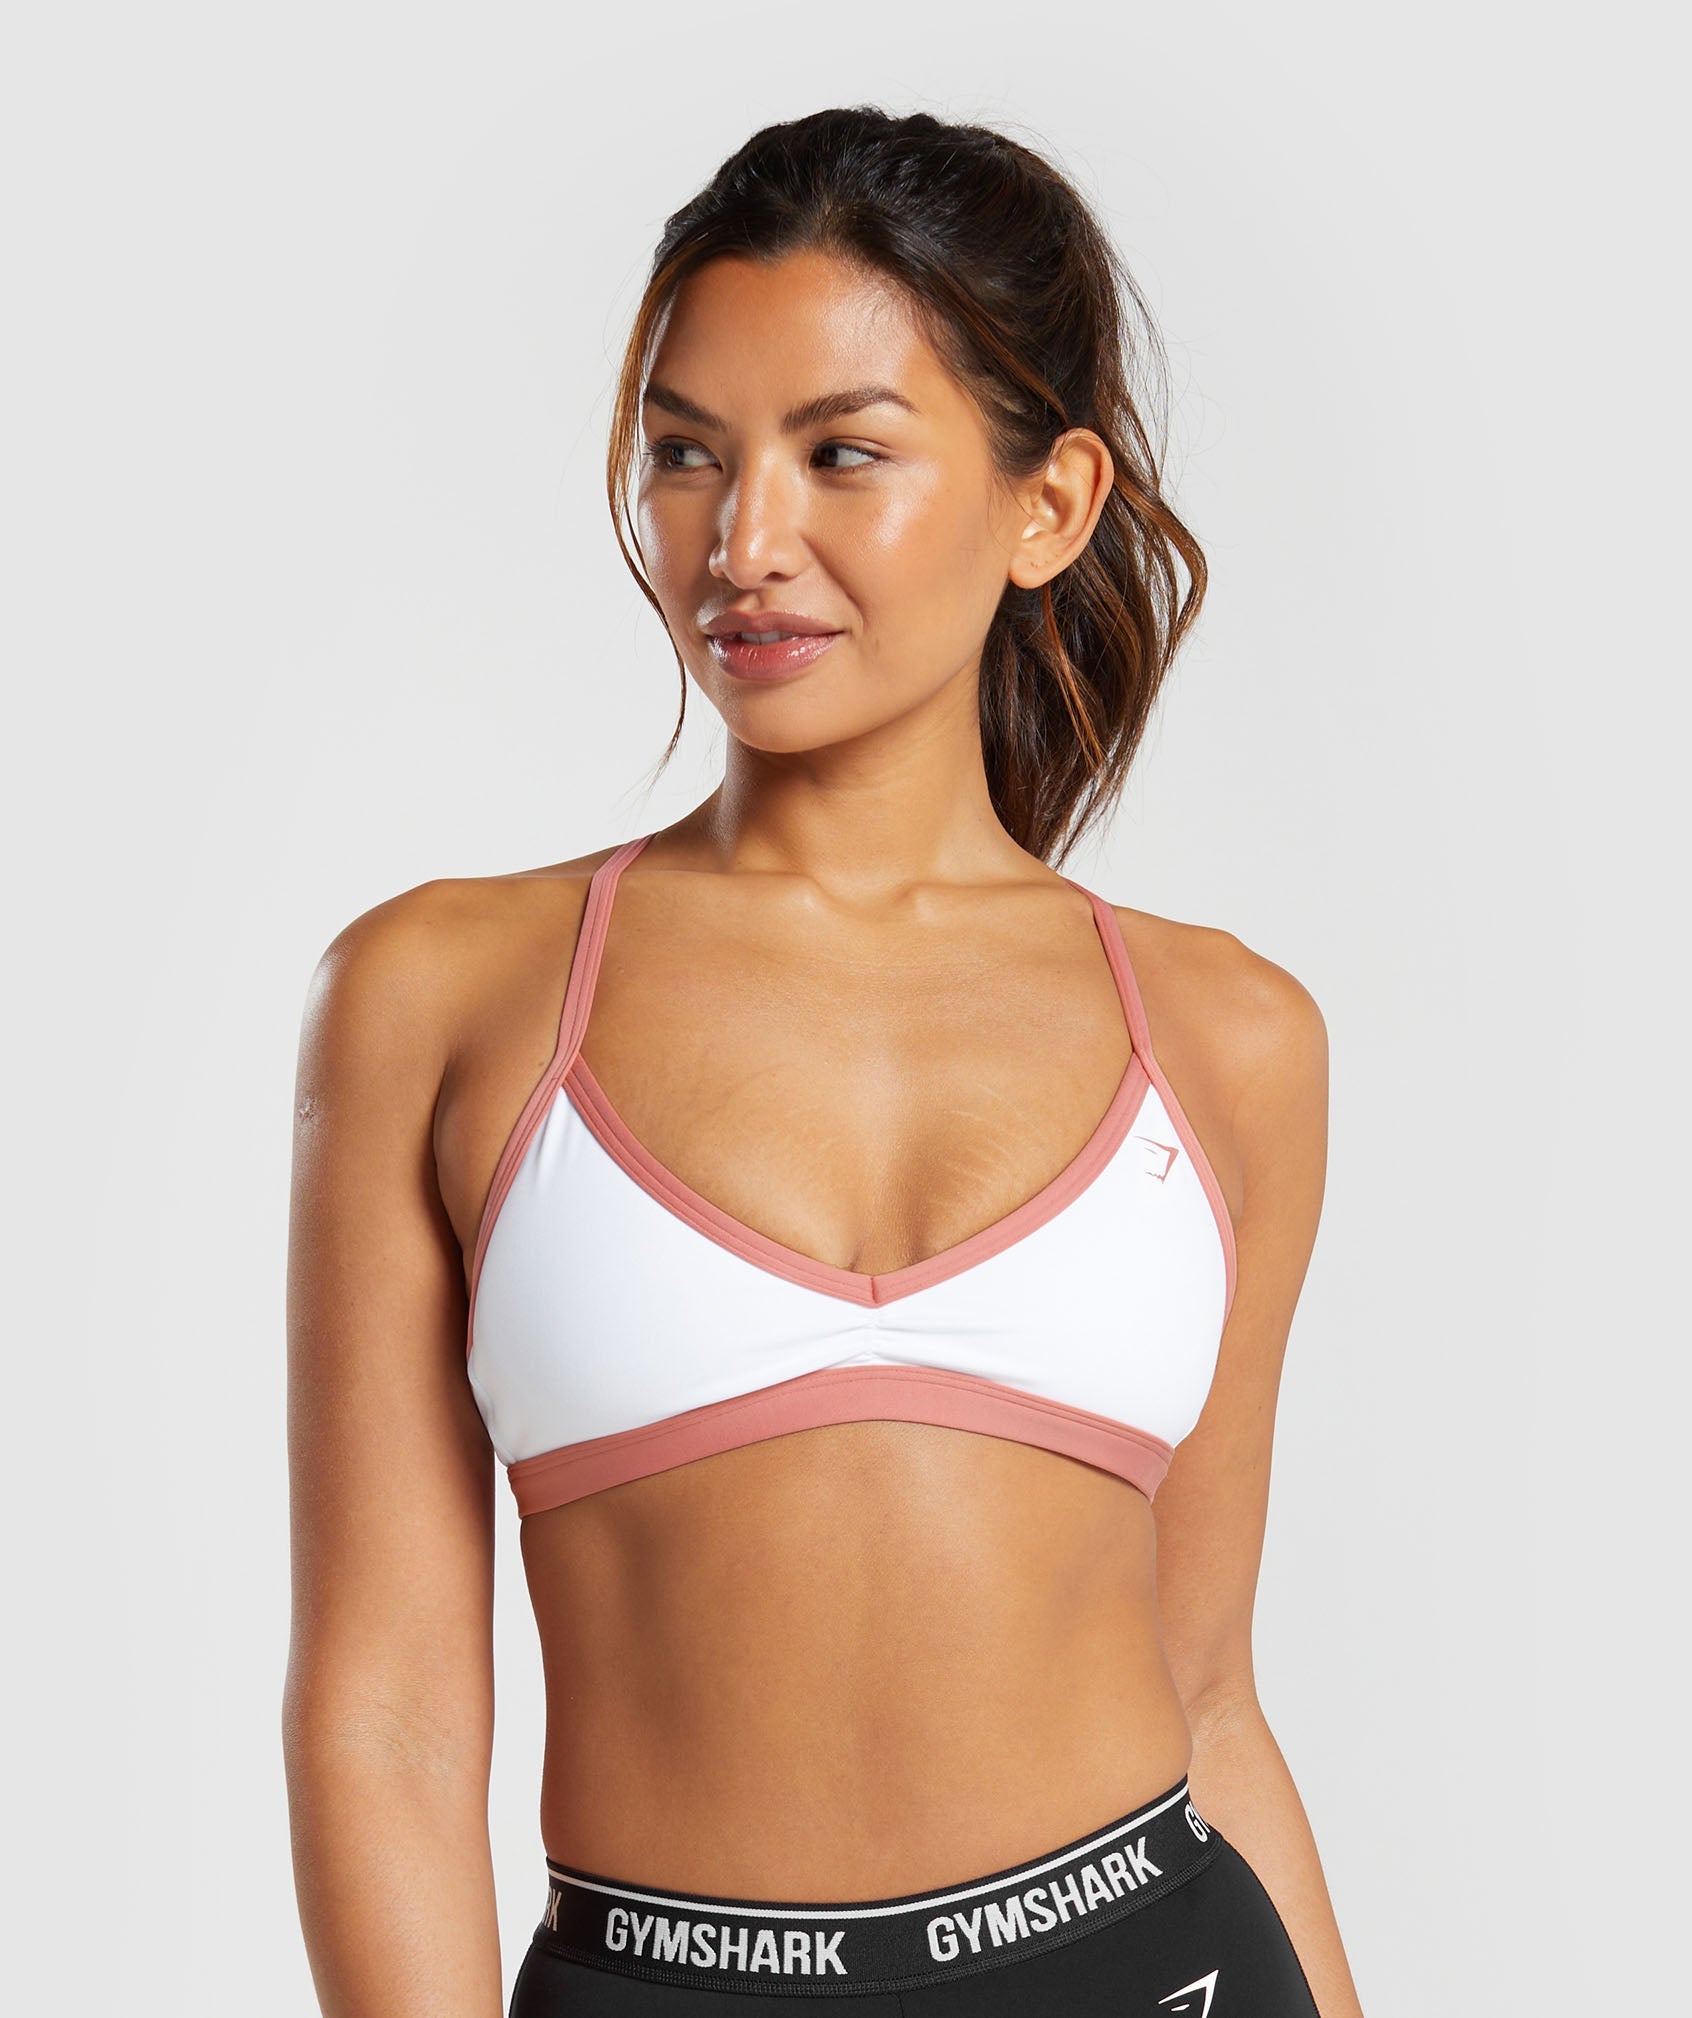 MOST FLATTERING SPORTS BRAS FOR SMALL BOOBS + SHORT TORSO ♡ GYMSHARK TRY ON